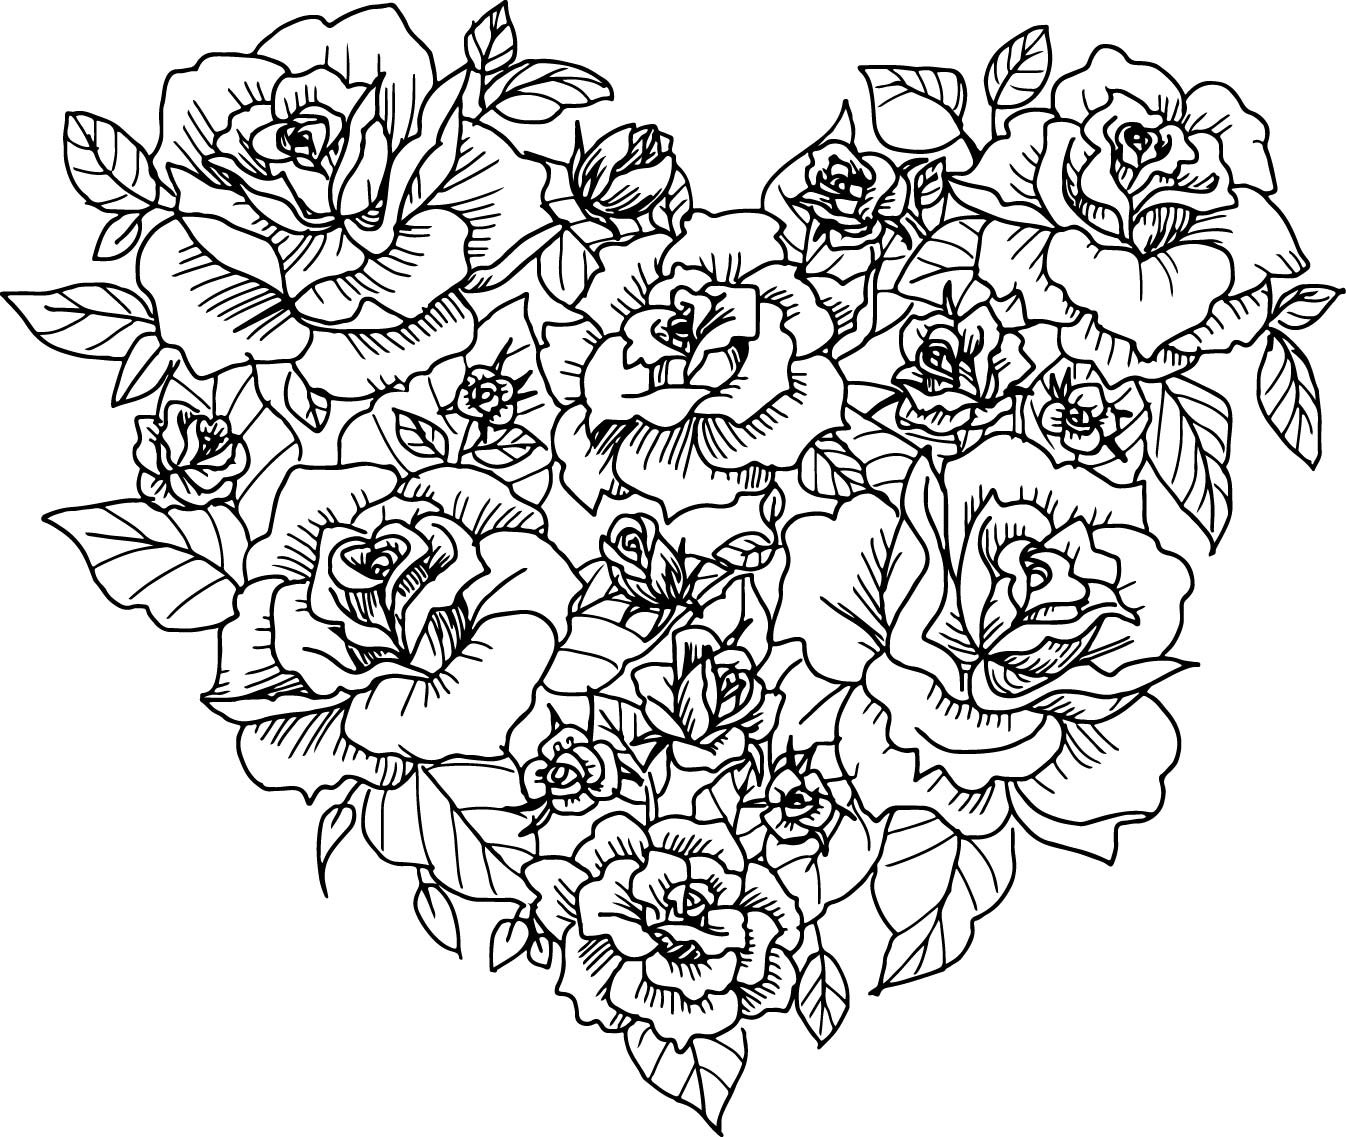 Heart With Roses Coloring Pages For Teens
 Heart Rose Sketch Coloring Page